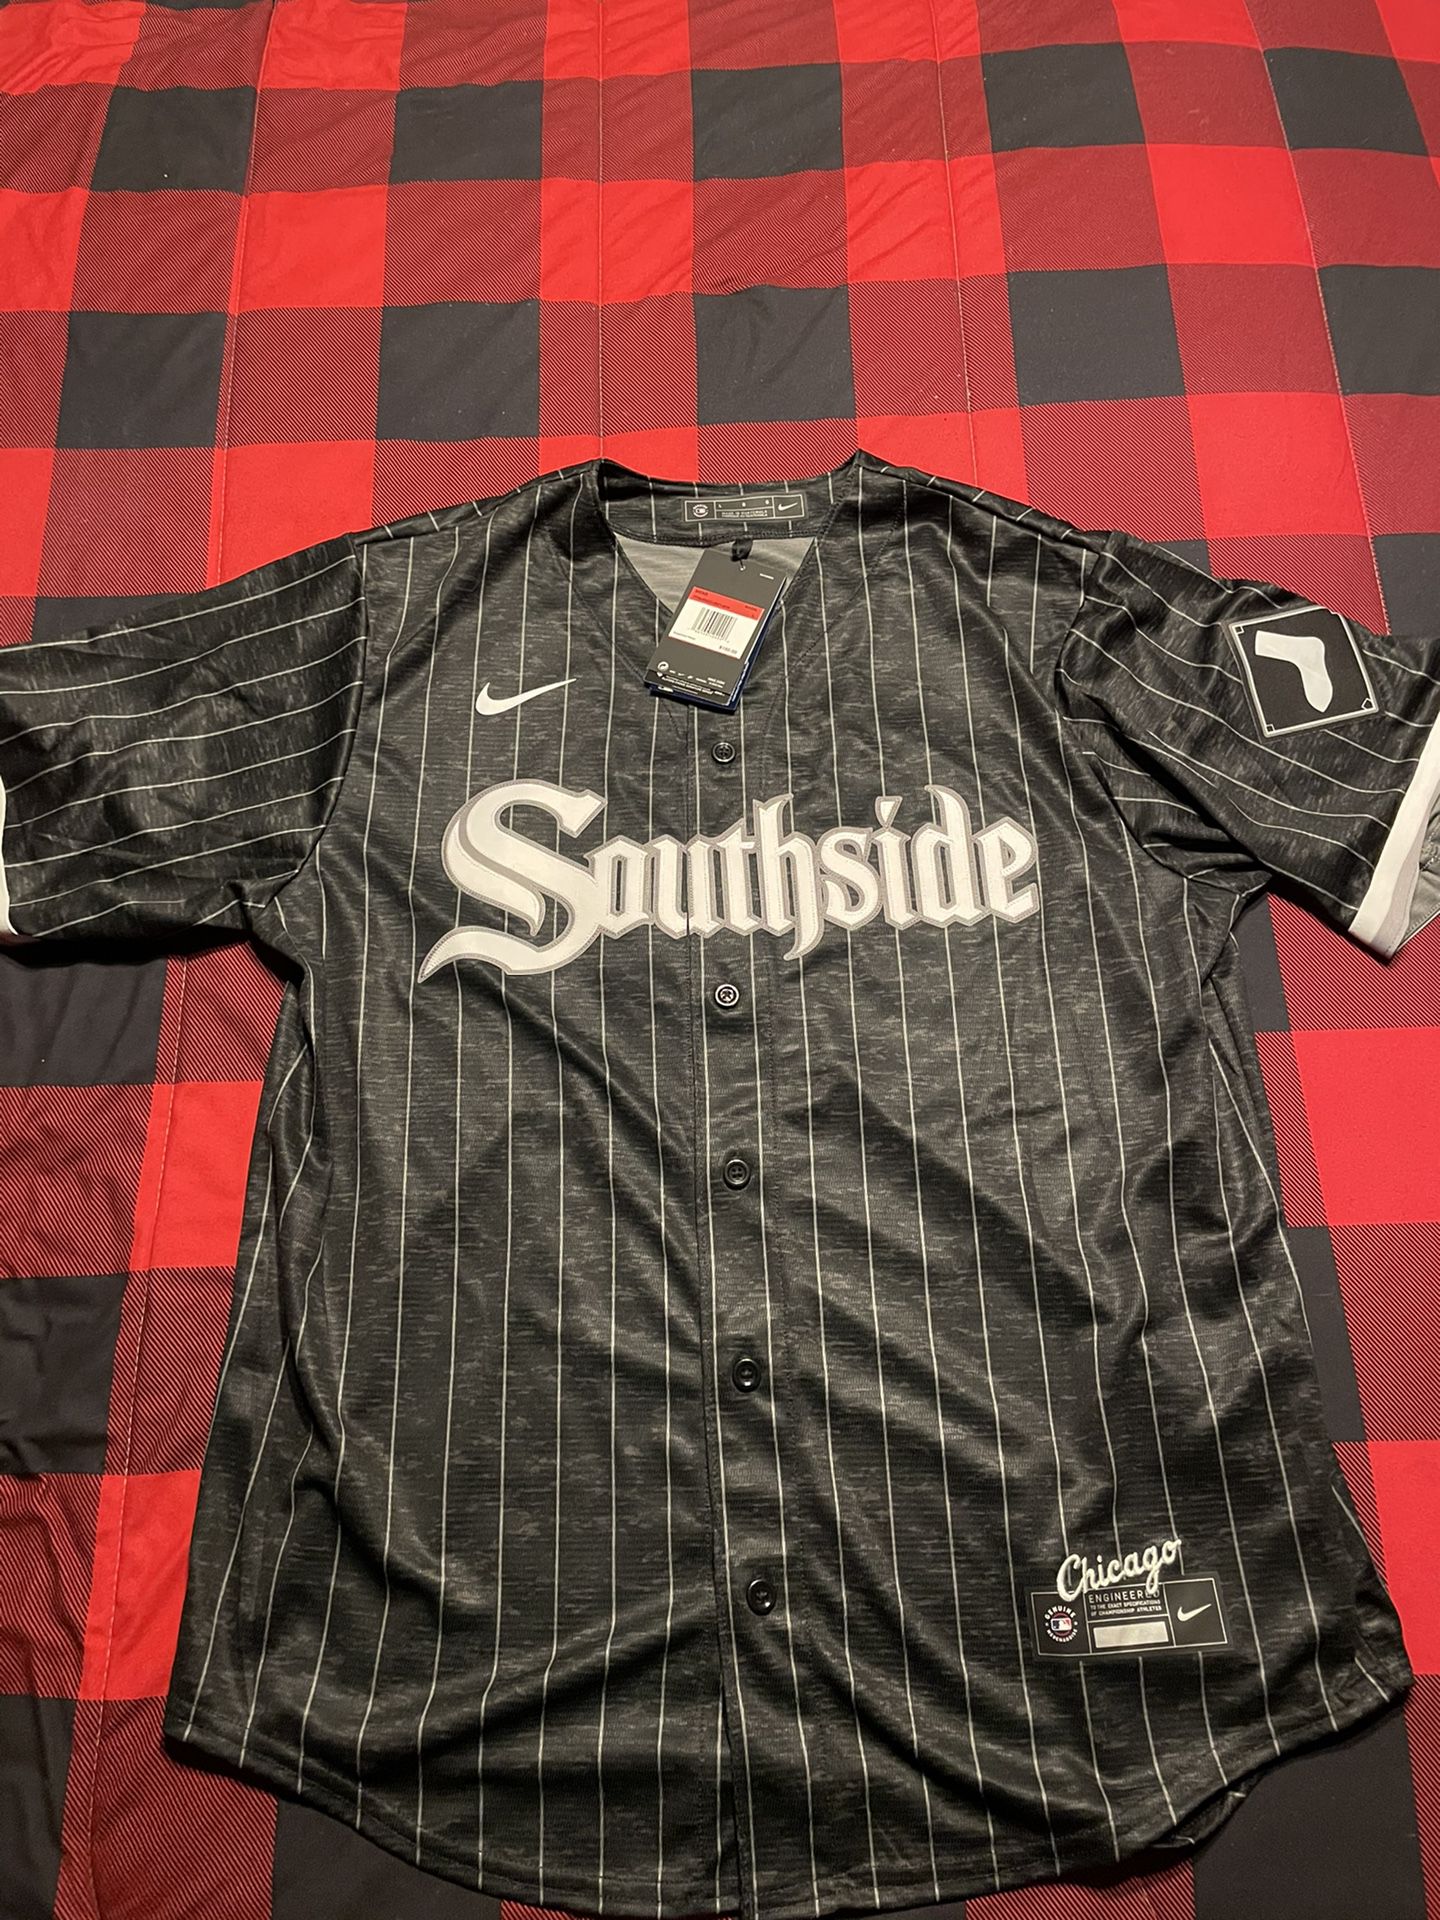 white sox city connect jersey for sale